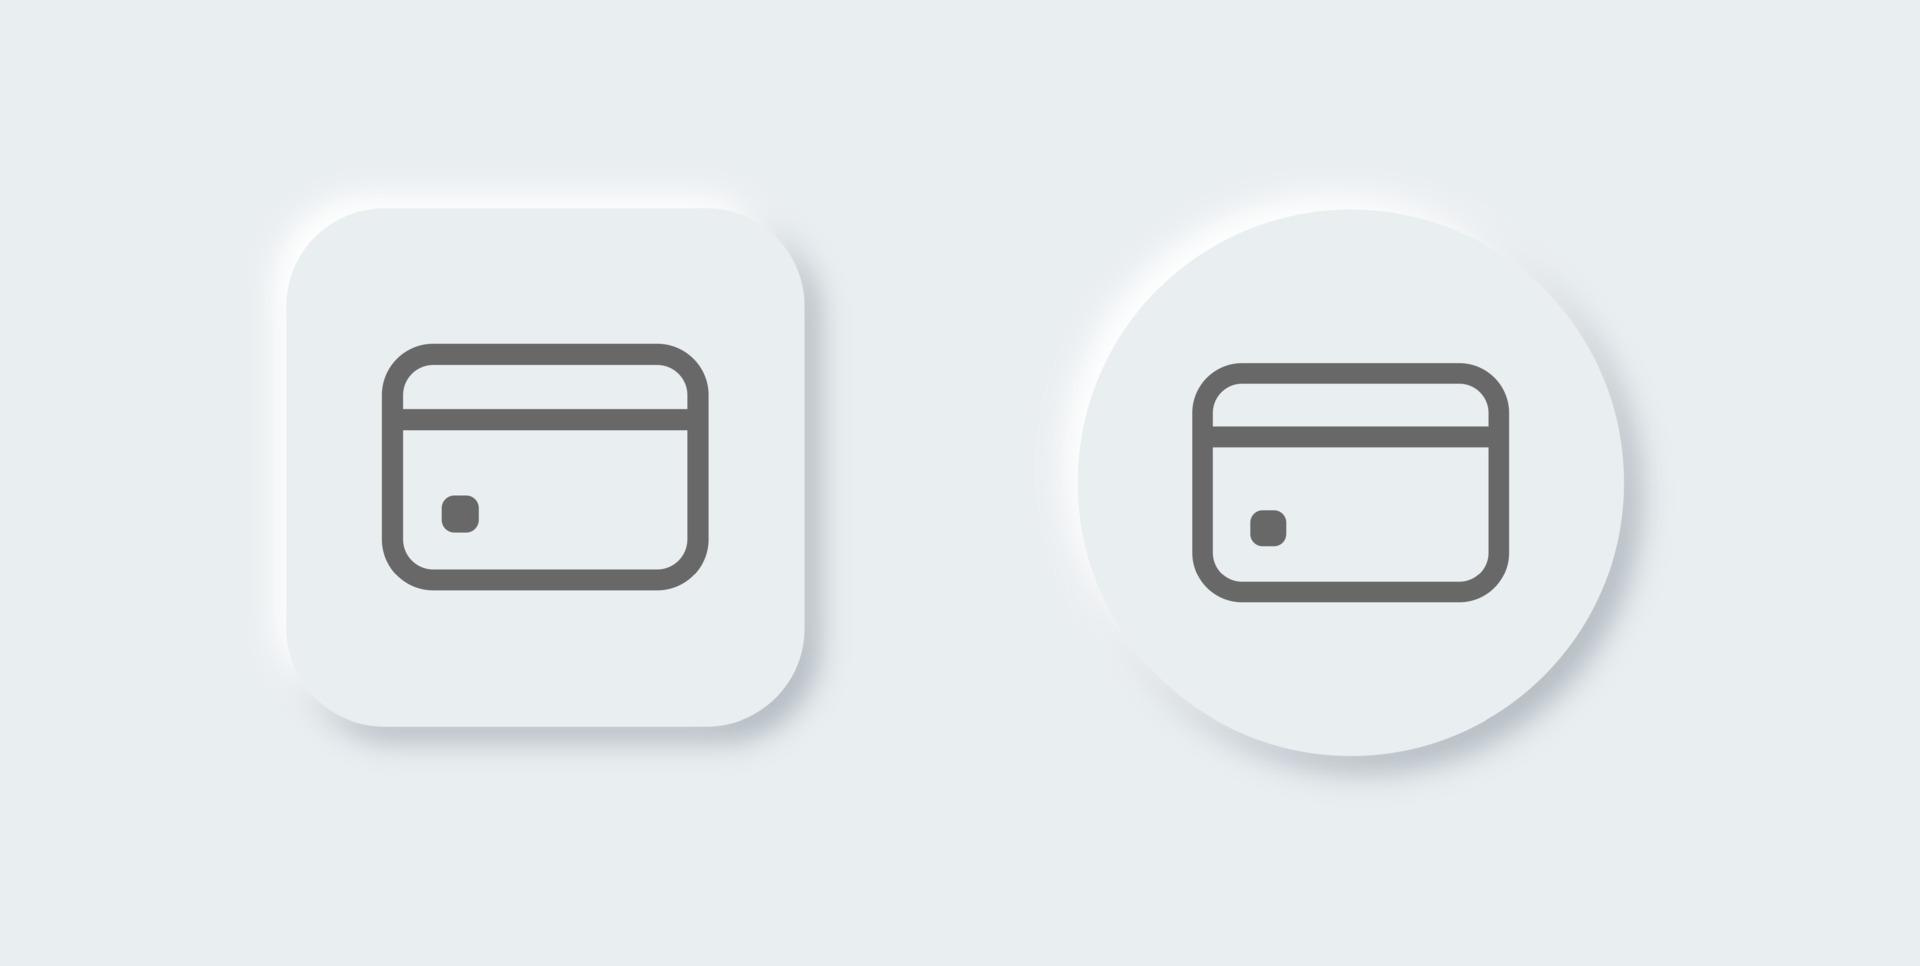 Credit card line icon in neomorphic design style. Payment card vector illustration.